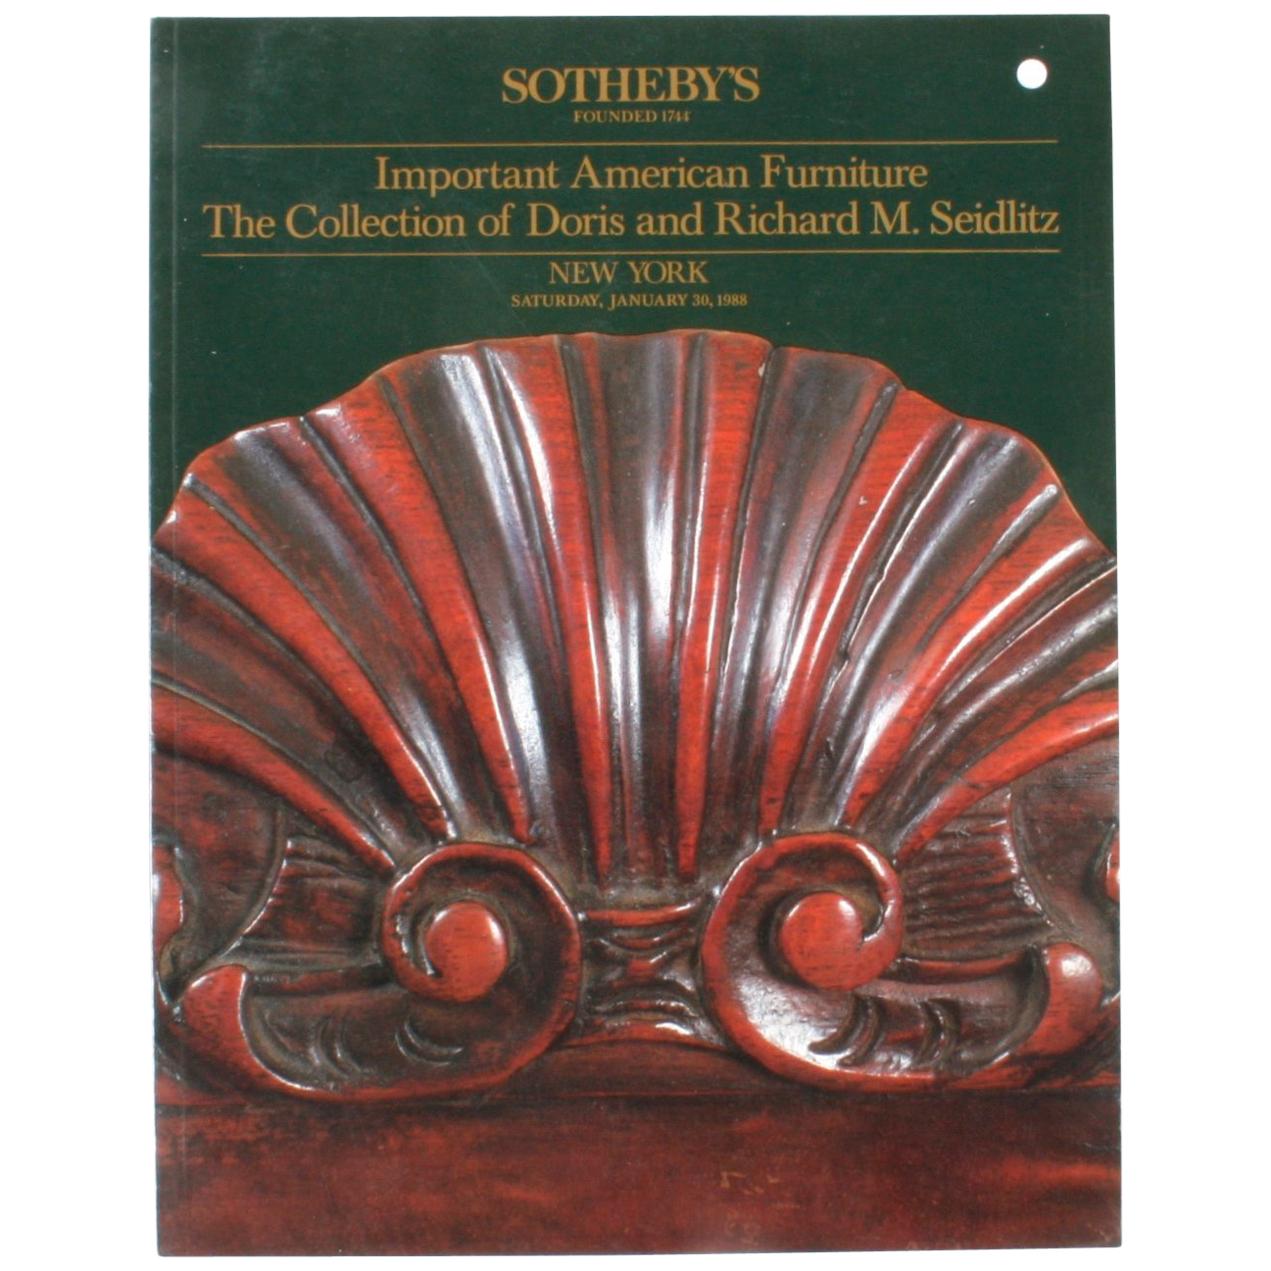 Sotheby's, Important American Furniture of Doris and Richard M. Seidlitz For Sale